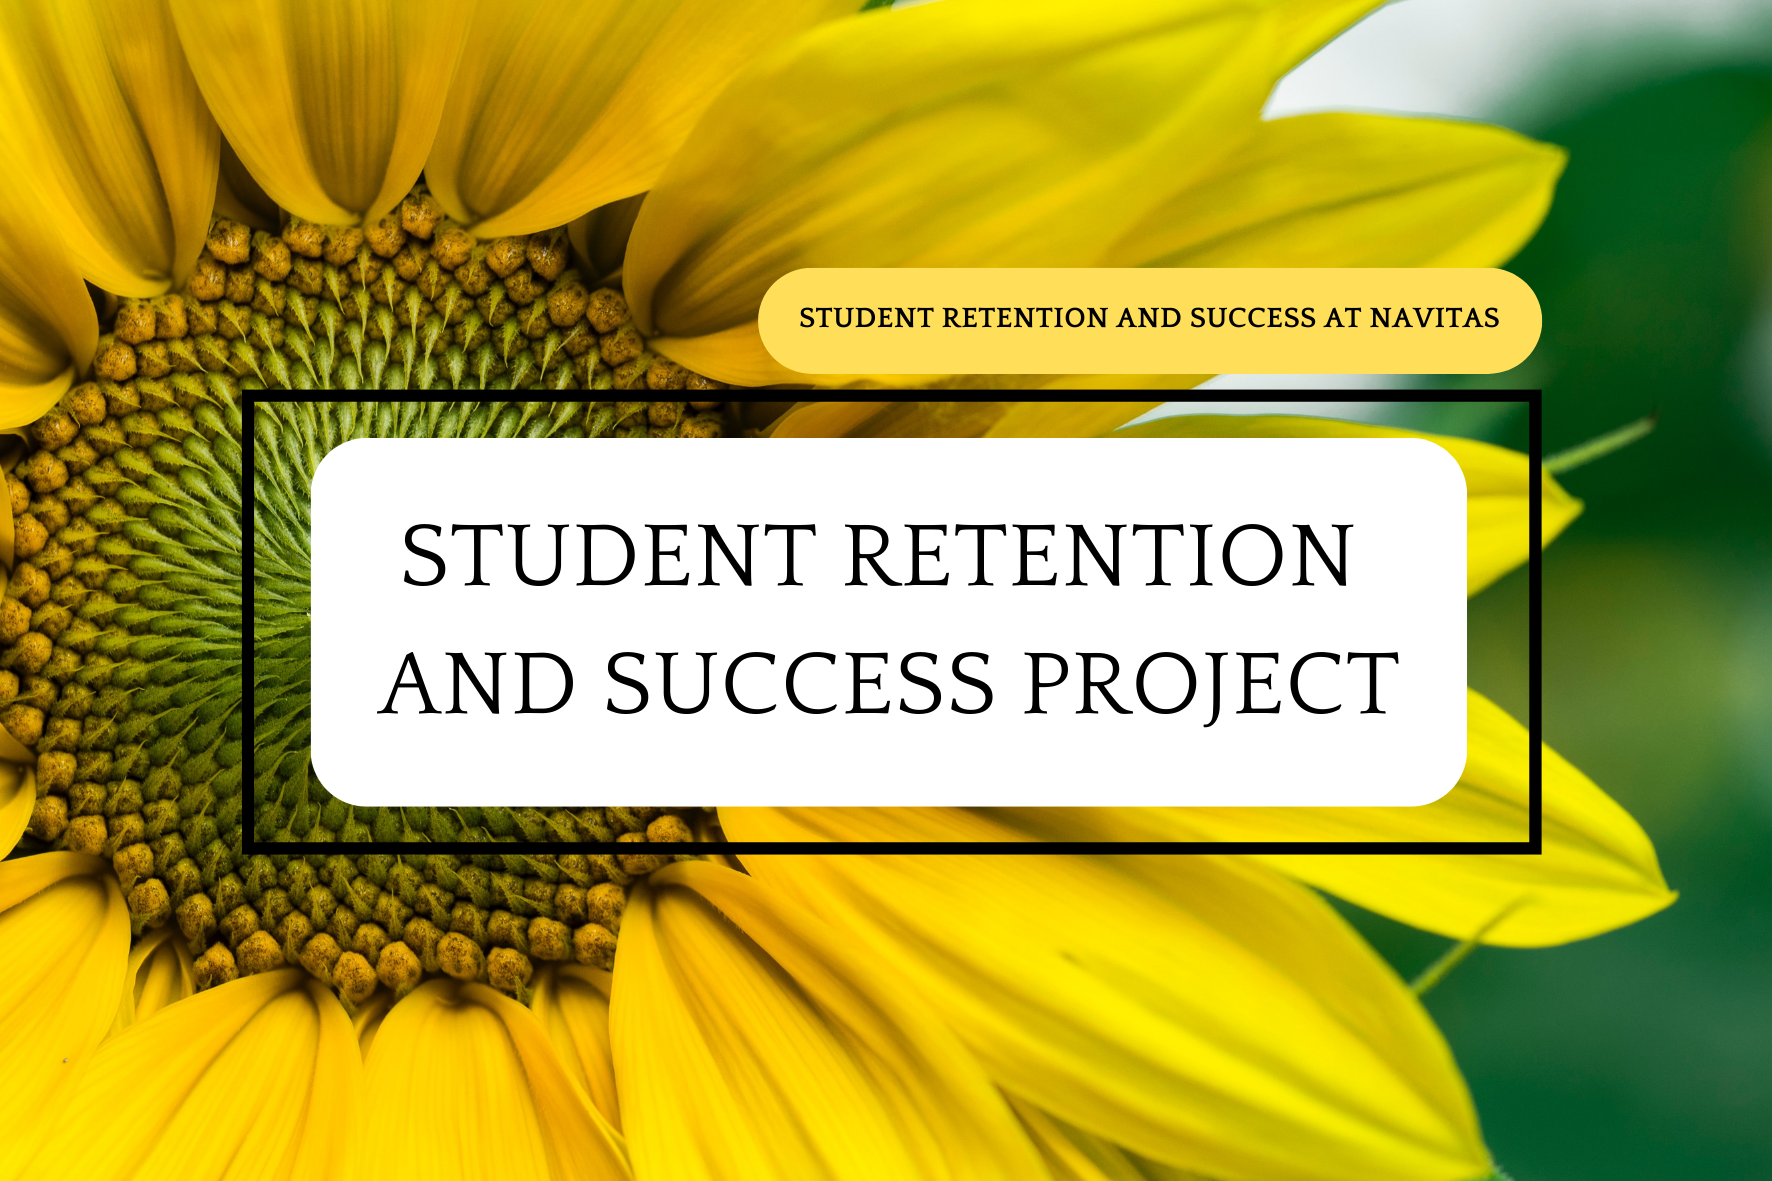 Student Retention and Success at Navitas